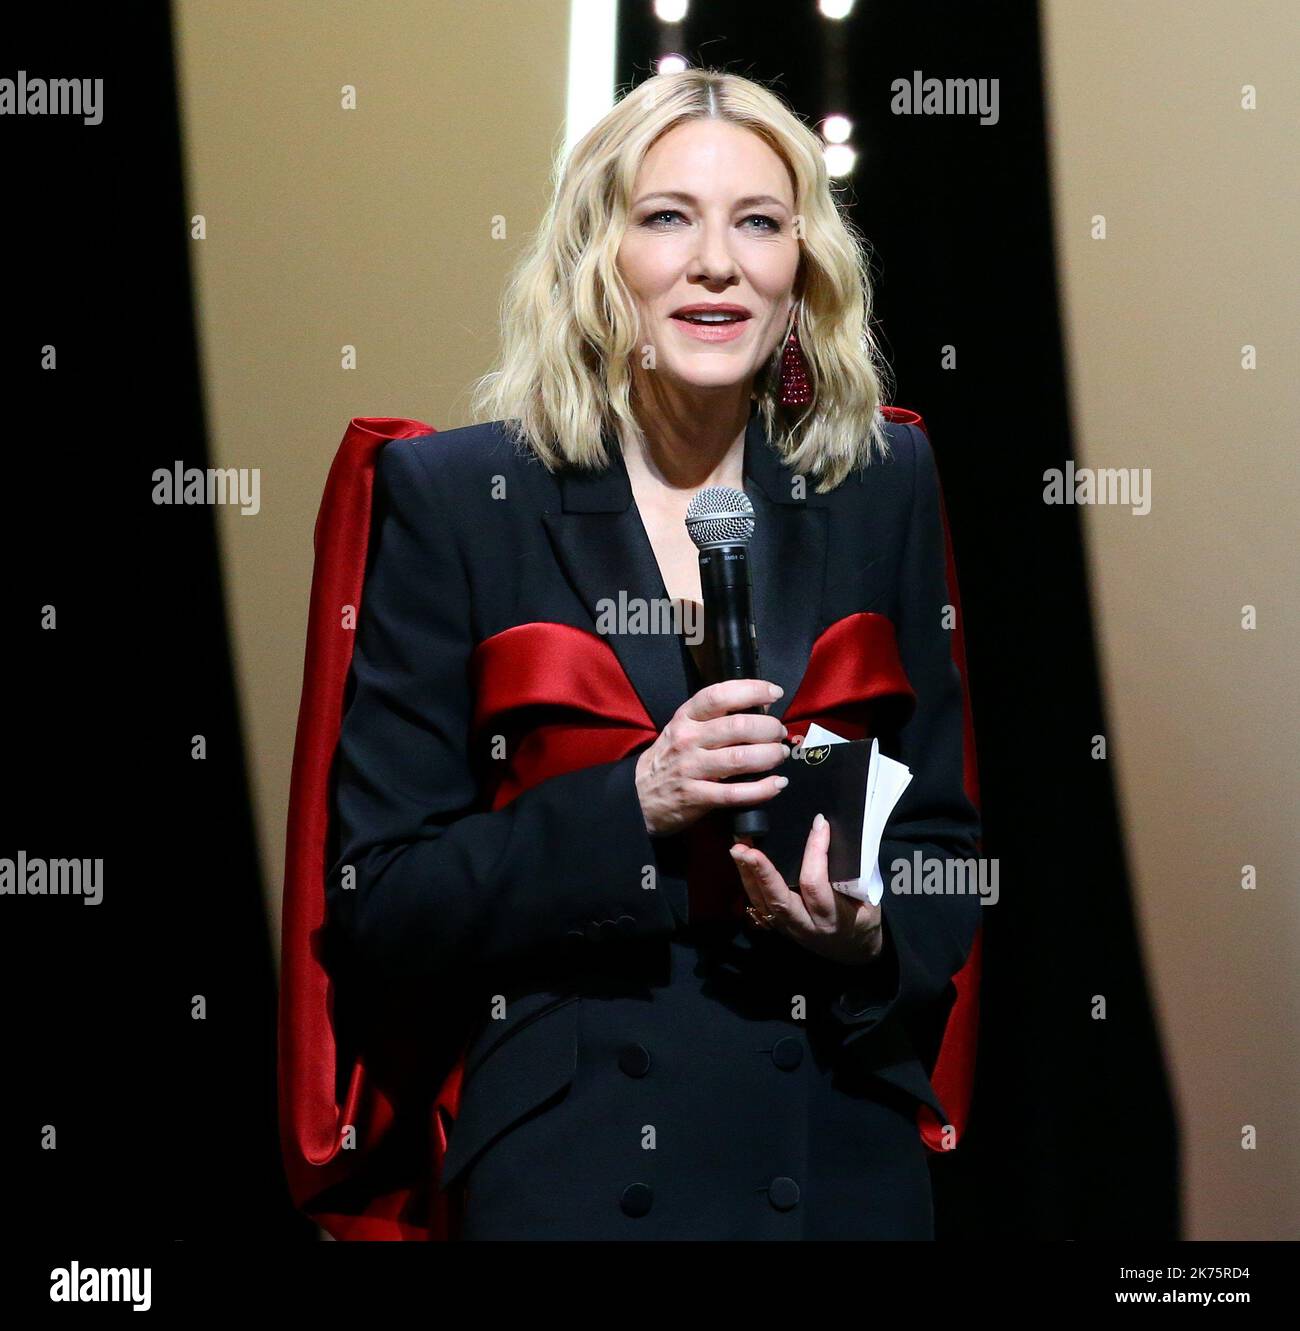 Australian actress and President of the Jury Cate Blanchett delivers a speech on stage on May 19, 2018 during the closing ceremony of the 71st edition of the Cannes Film Festival in Cannes, southern France.   71st annual Cannes Film Festival in Cannes, France, May 2018. The film festival will run from 8 to 19 May. Stock Photo